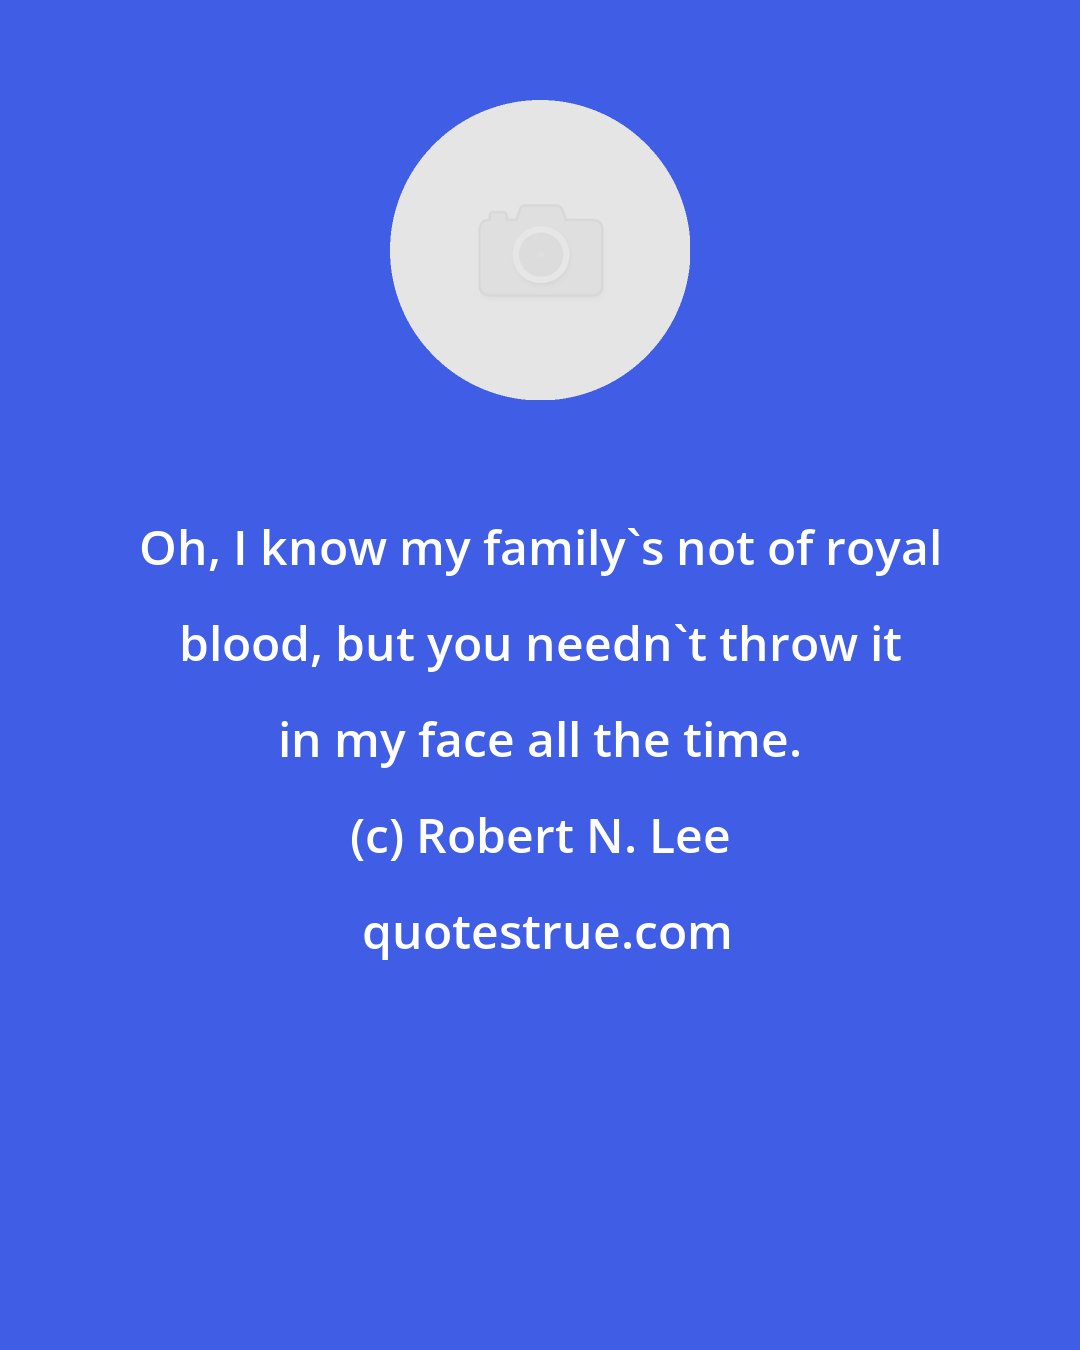 Robert N. Lee: Oh, I know my family's not of royal blood, but you needn't throw it in my face all the time.